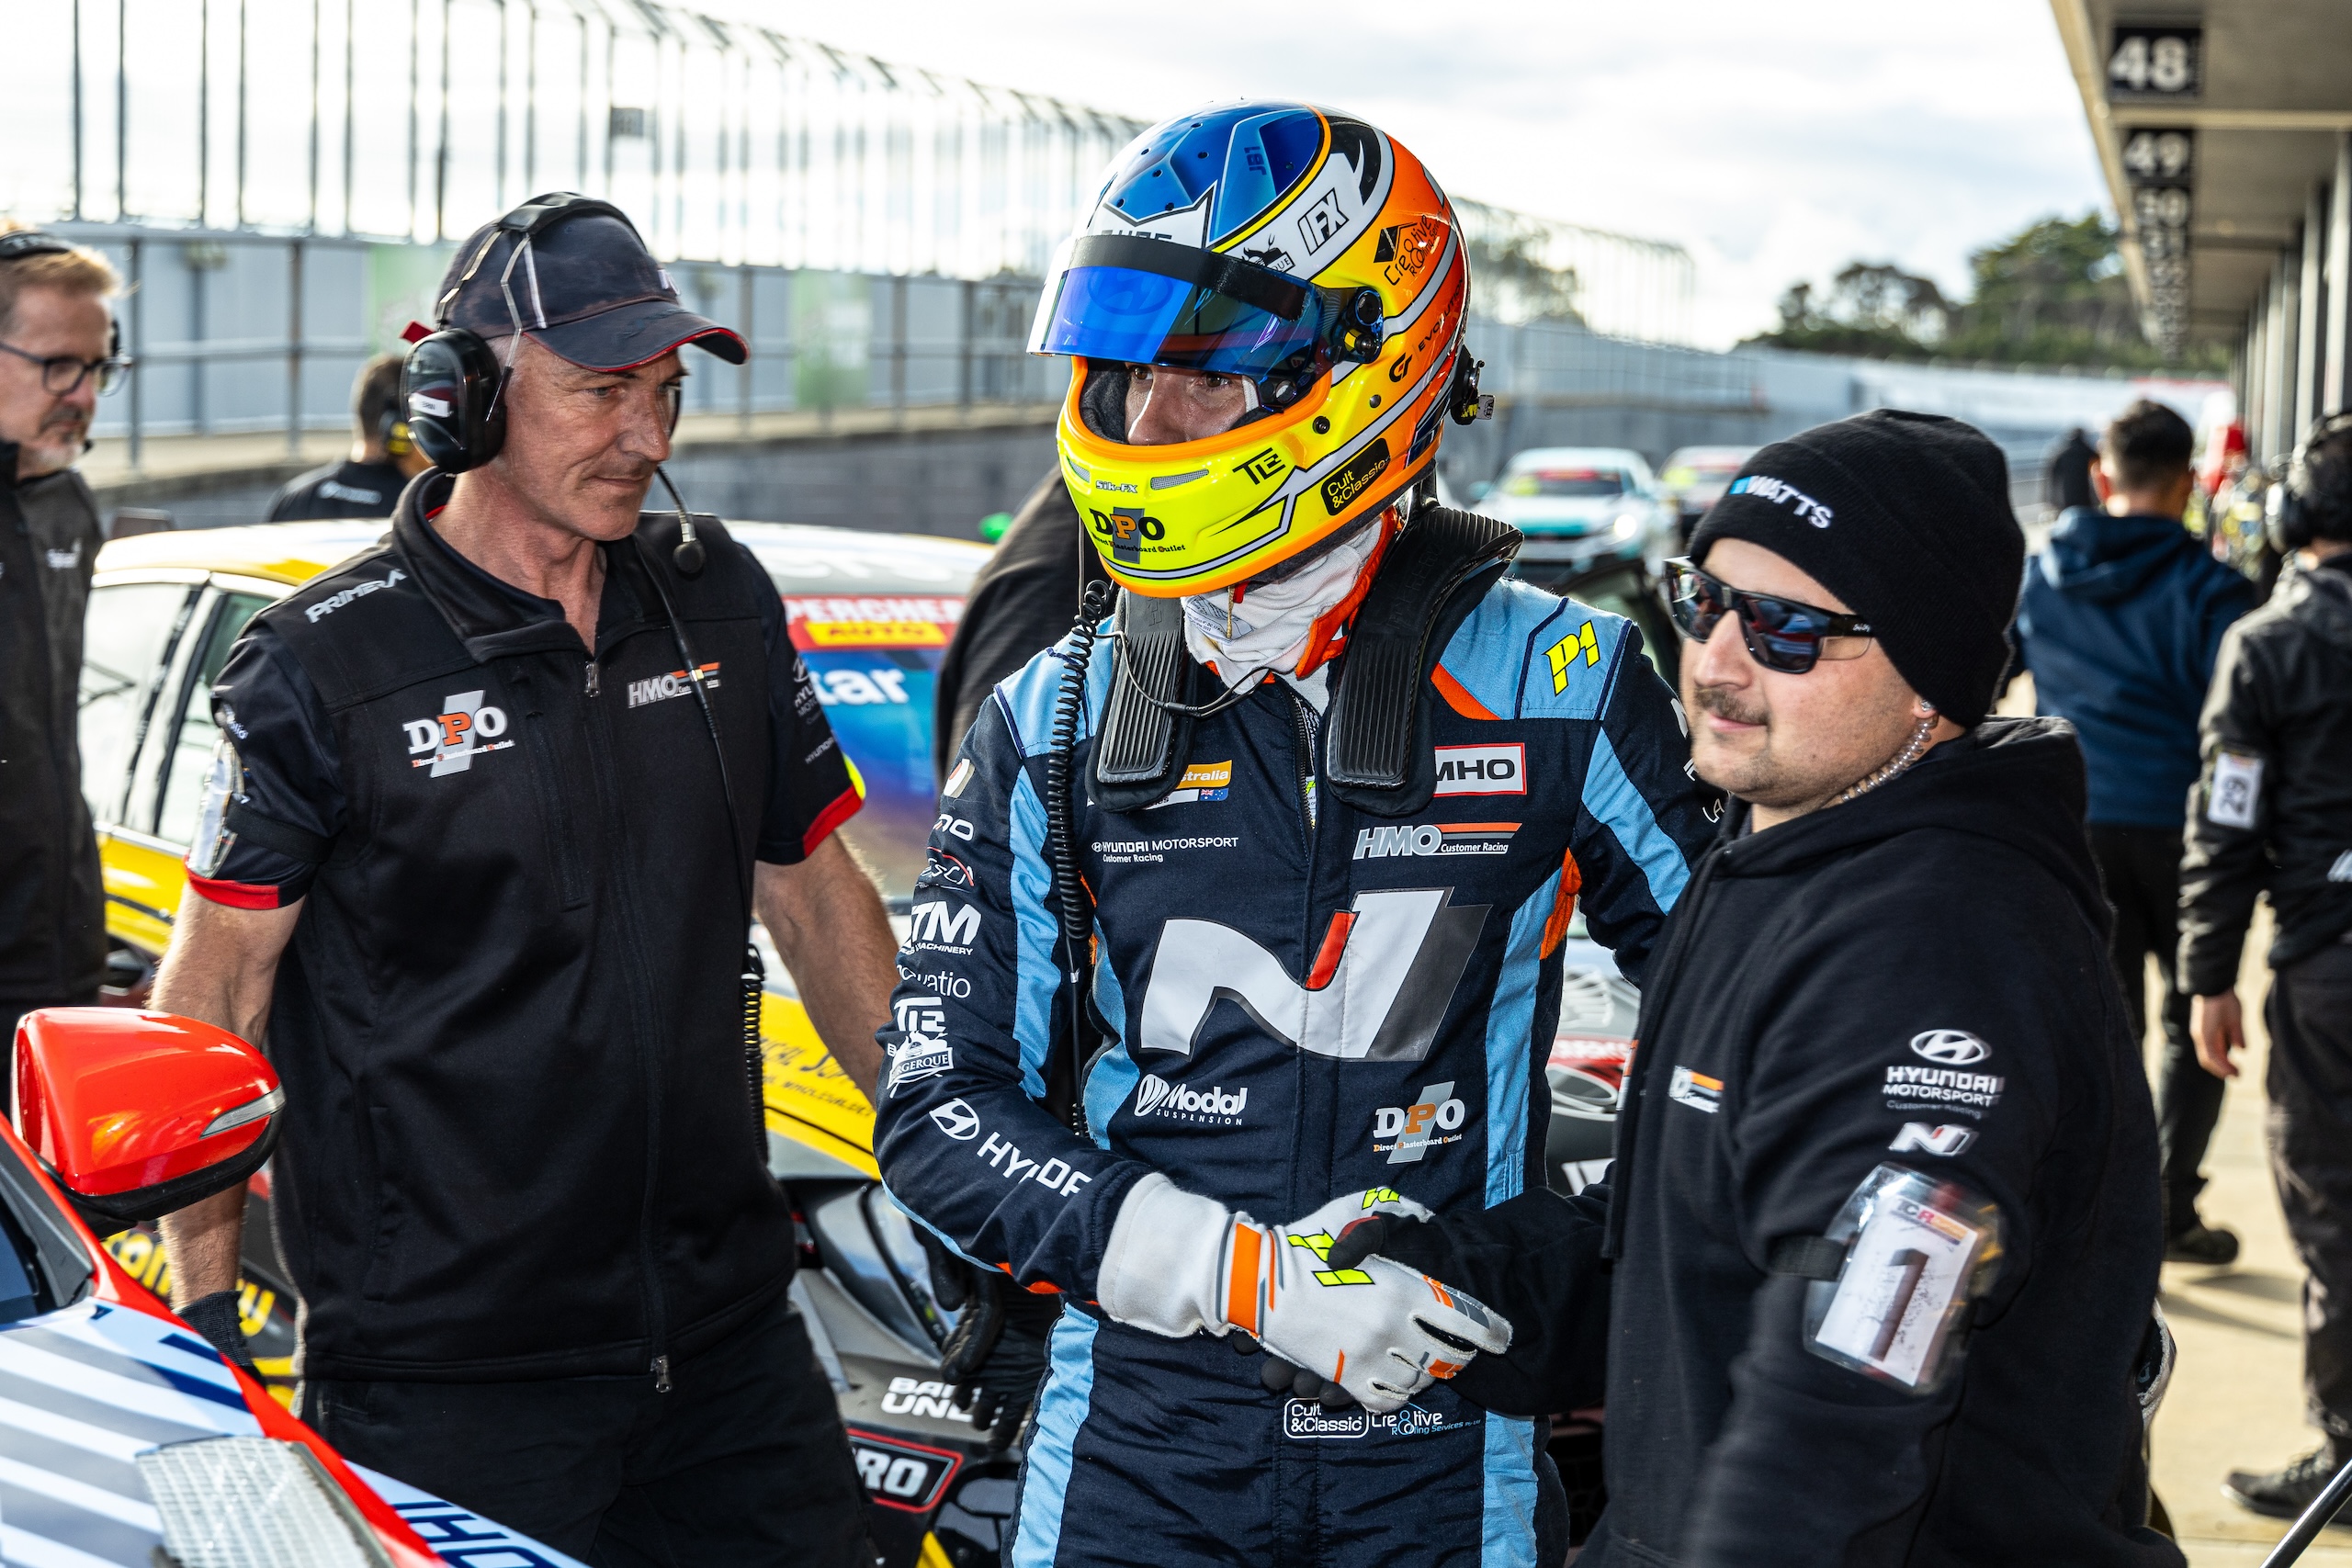 Defending Champ Claws Back Ground at Phillip Island